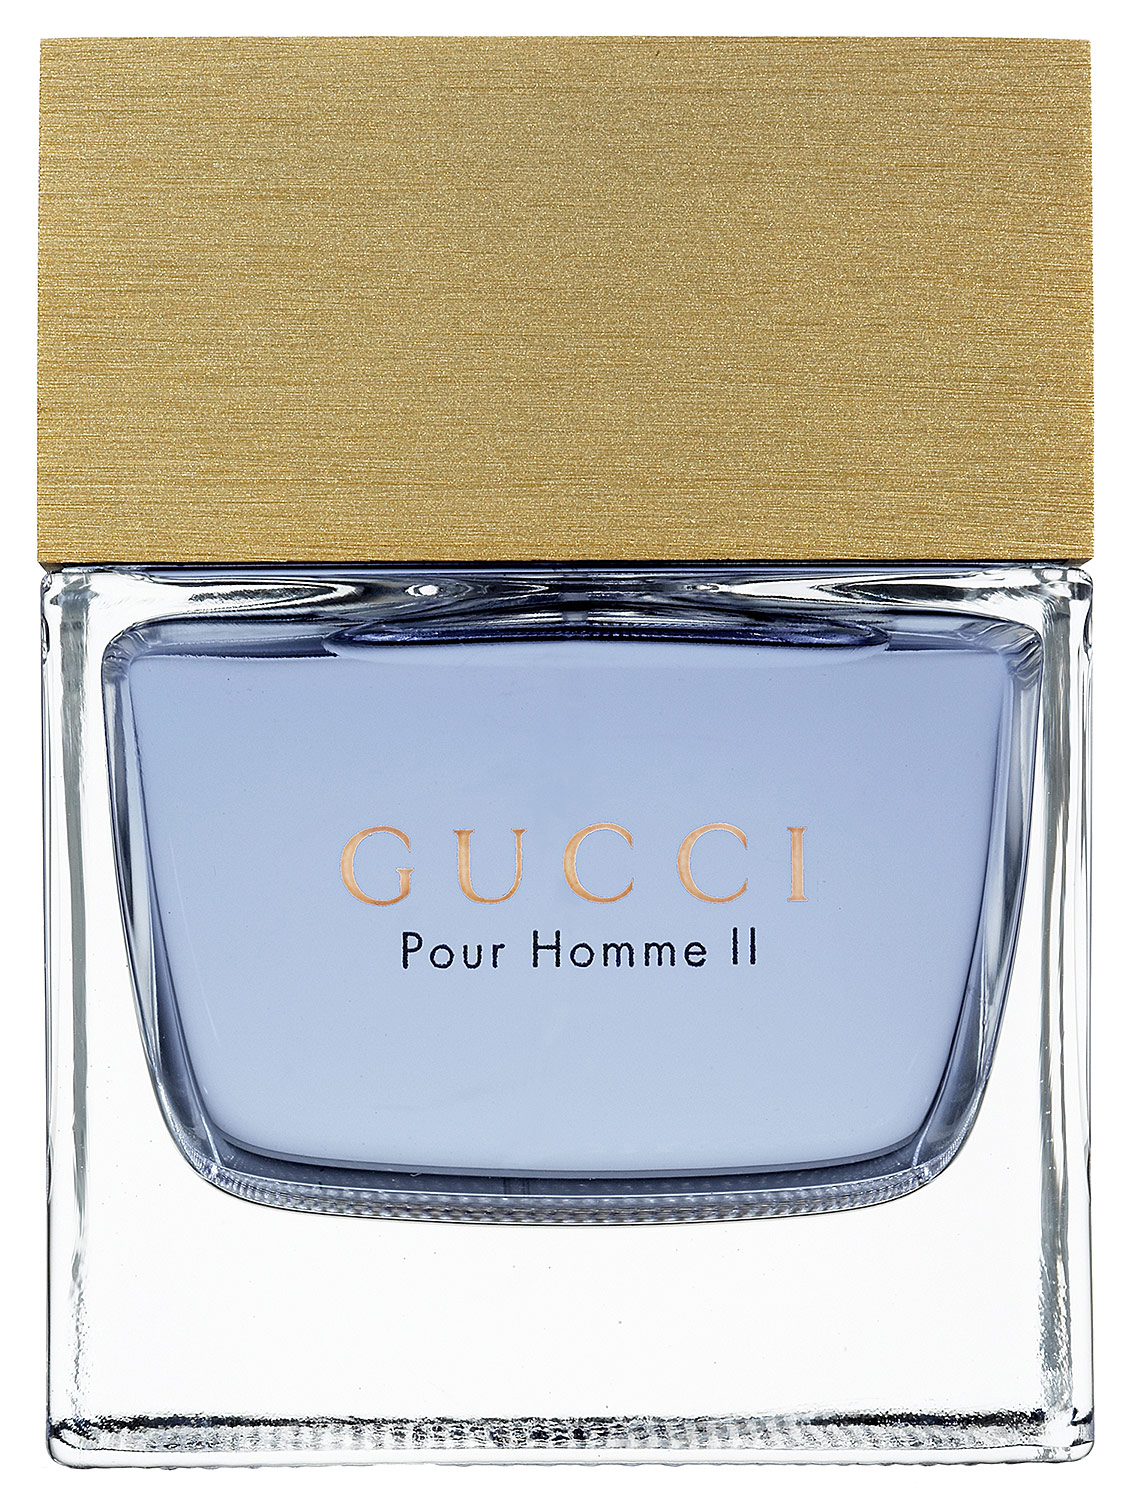 Gucci Pour Homme II - which version?